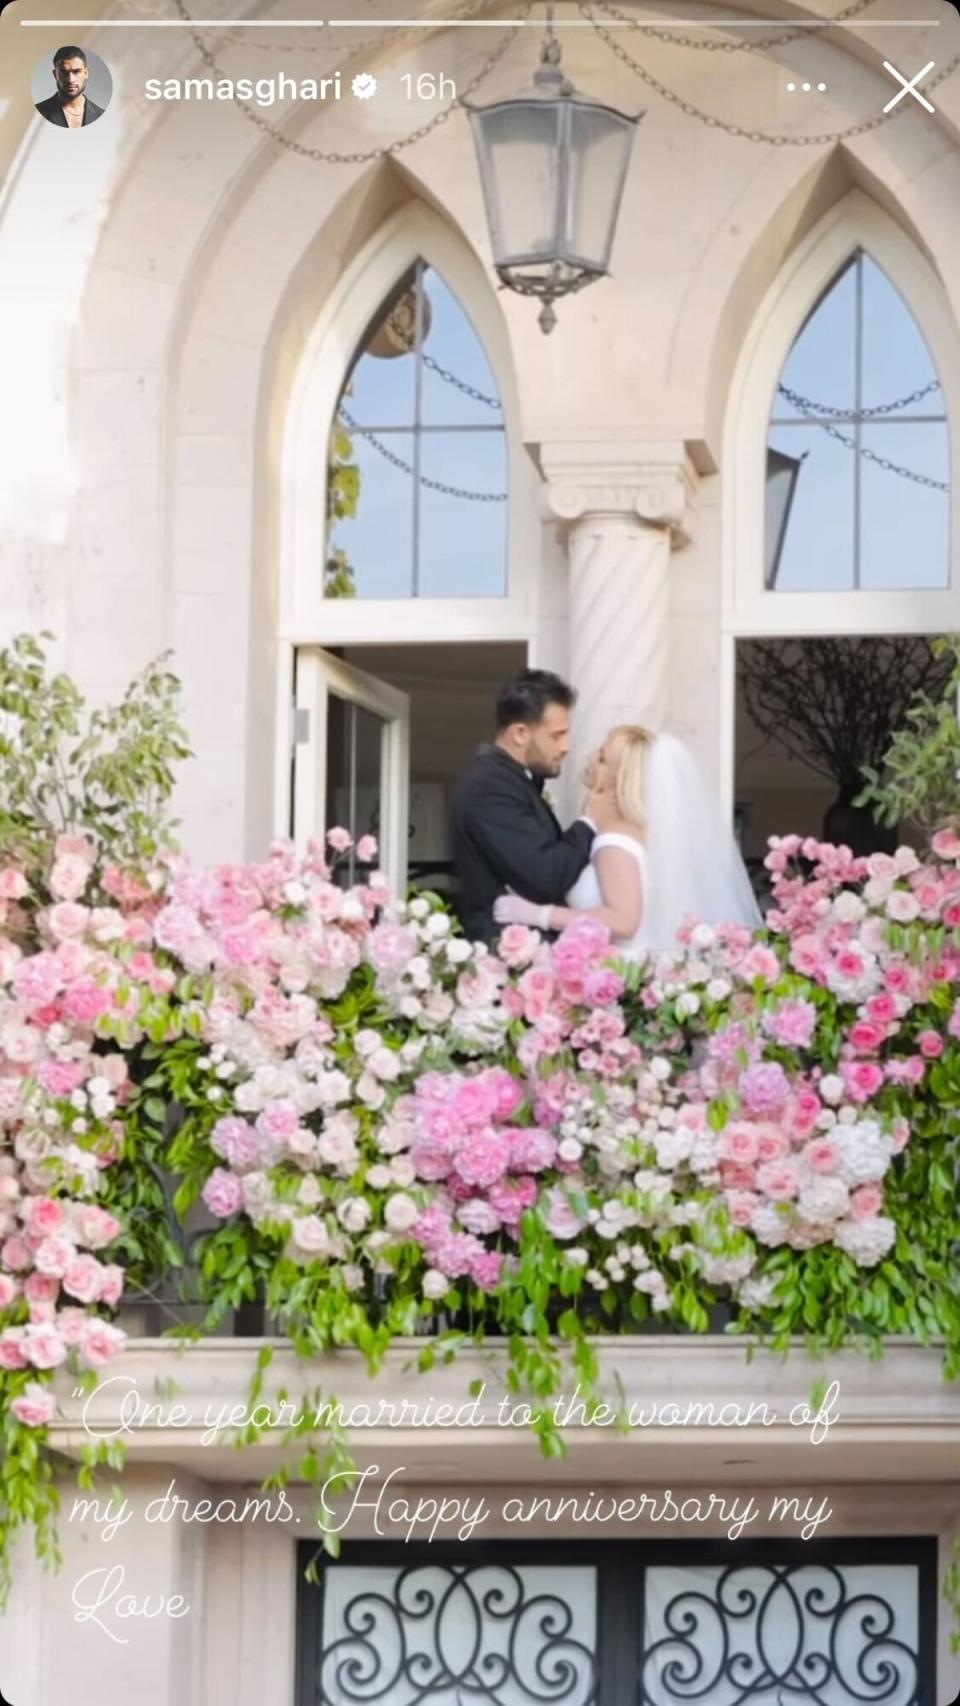 Sam Asghari shared clips from his and Britney Spears’ wedding last year (Instagram/Sam Asghari)